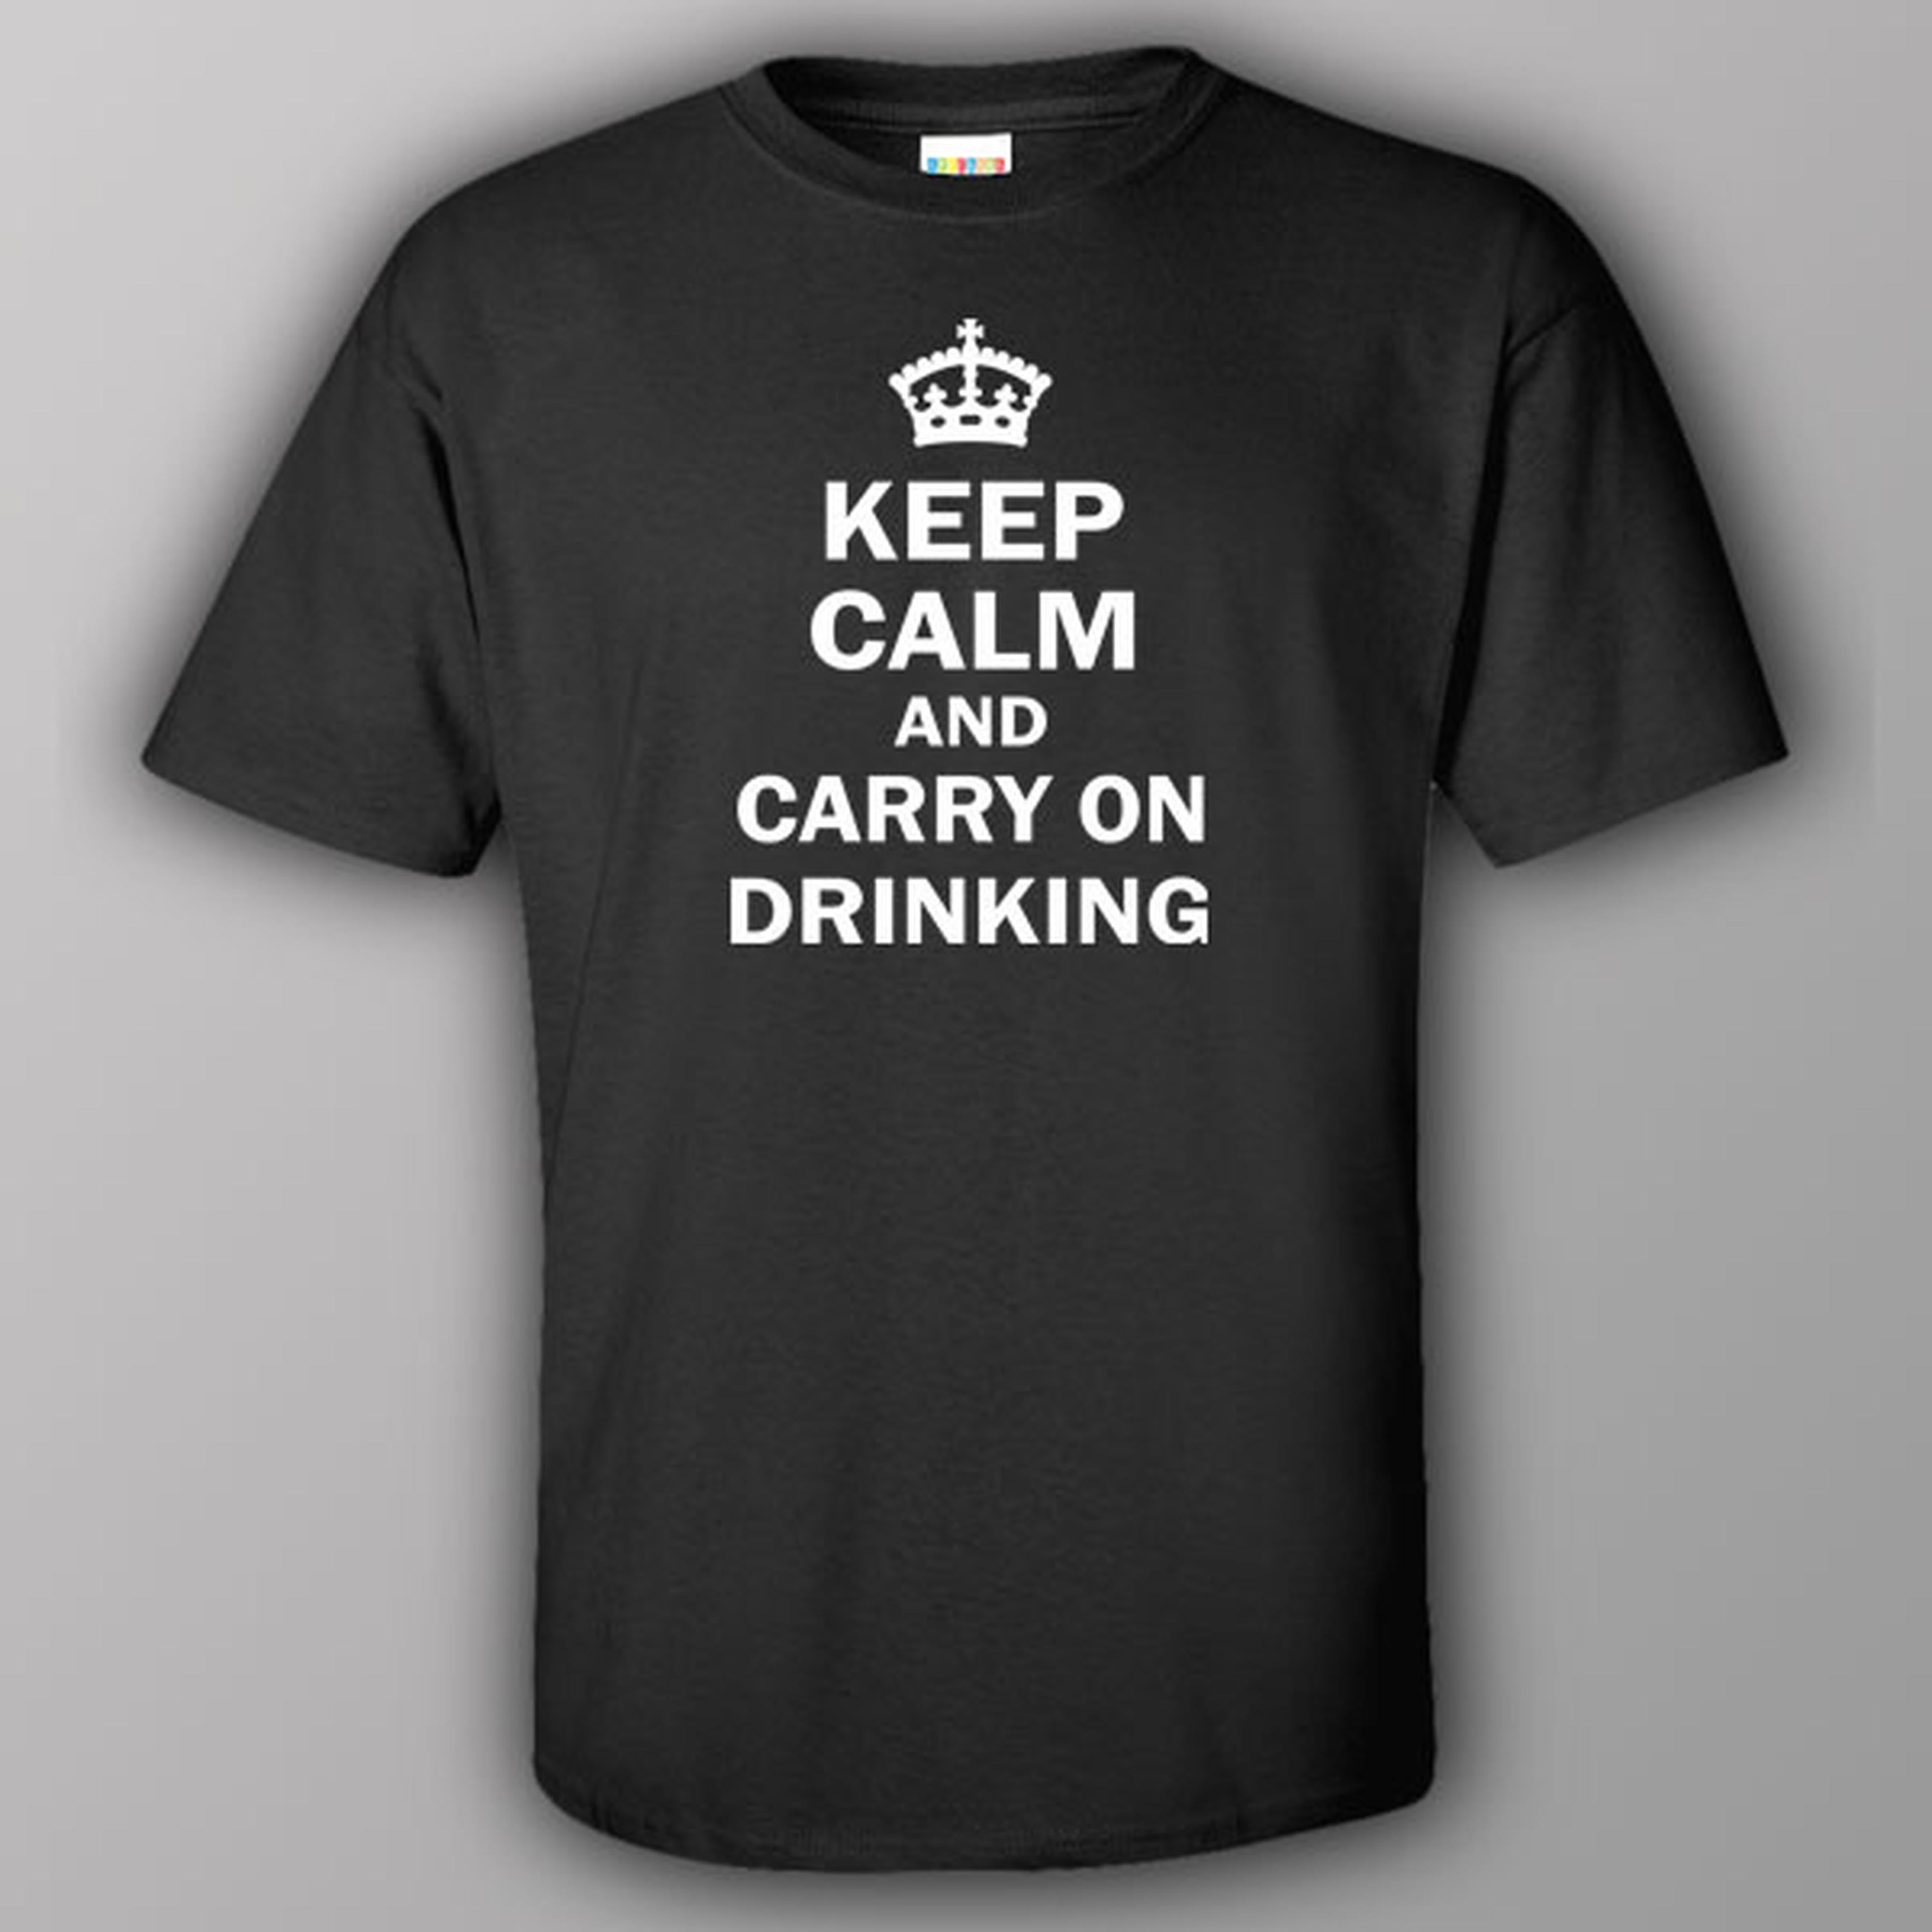 Keep calm and carry on drinking - T-shirt